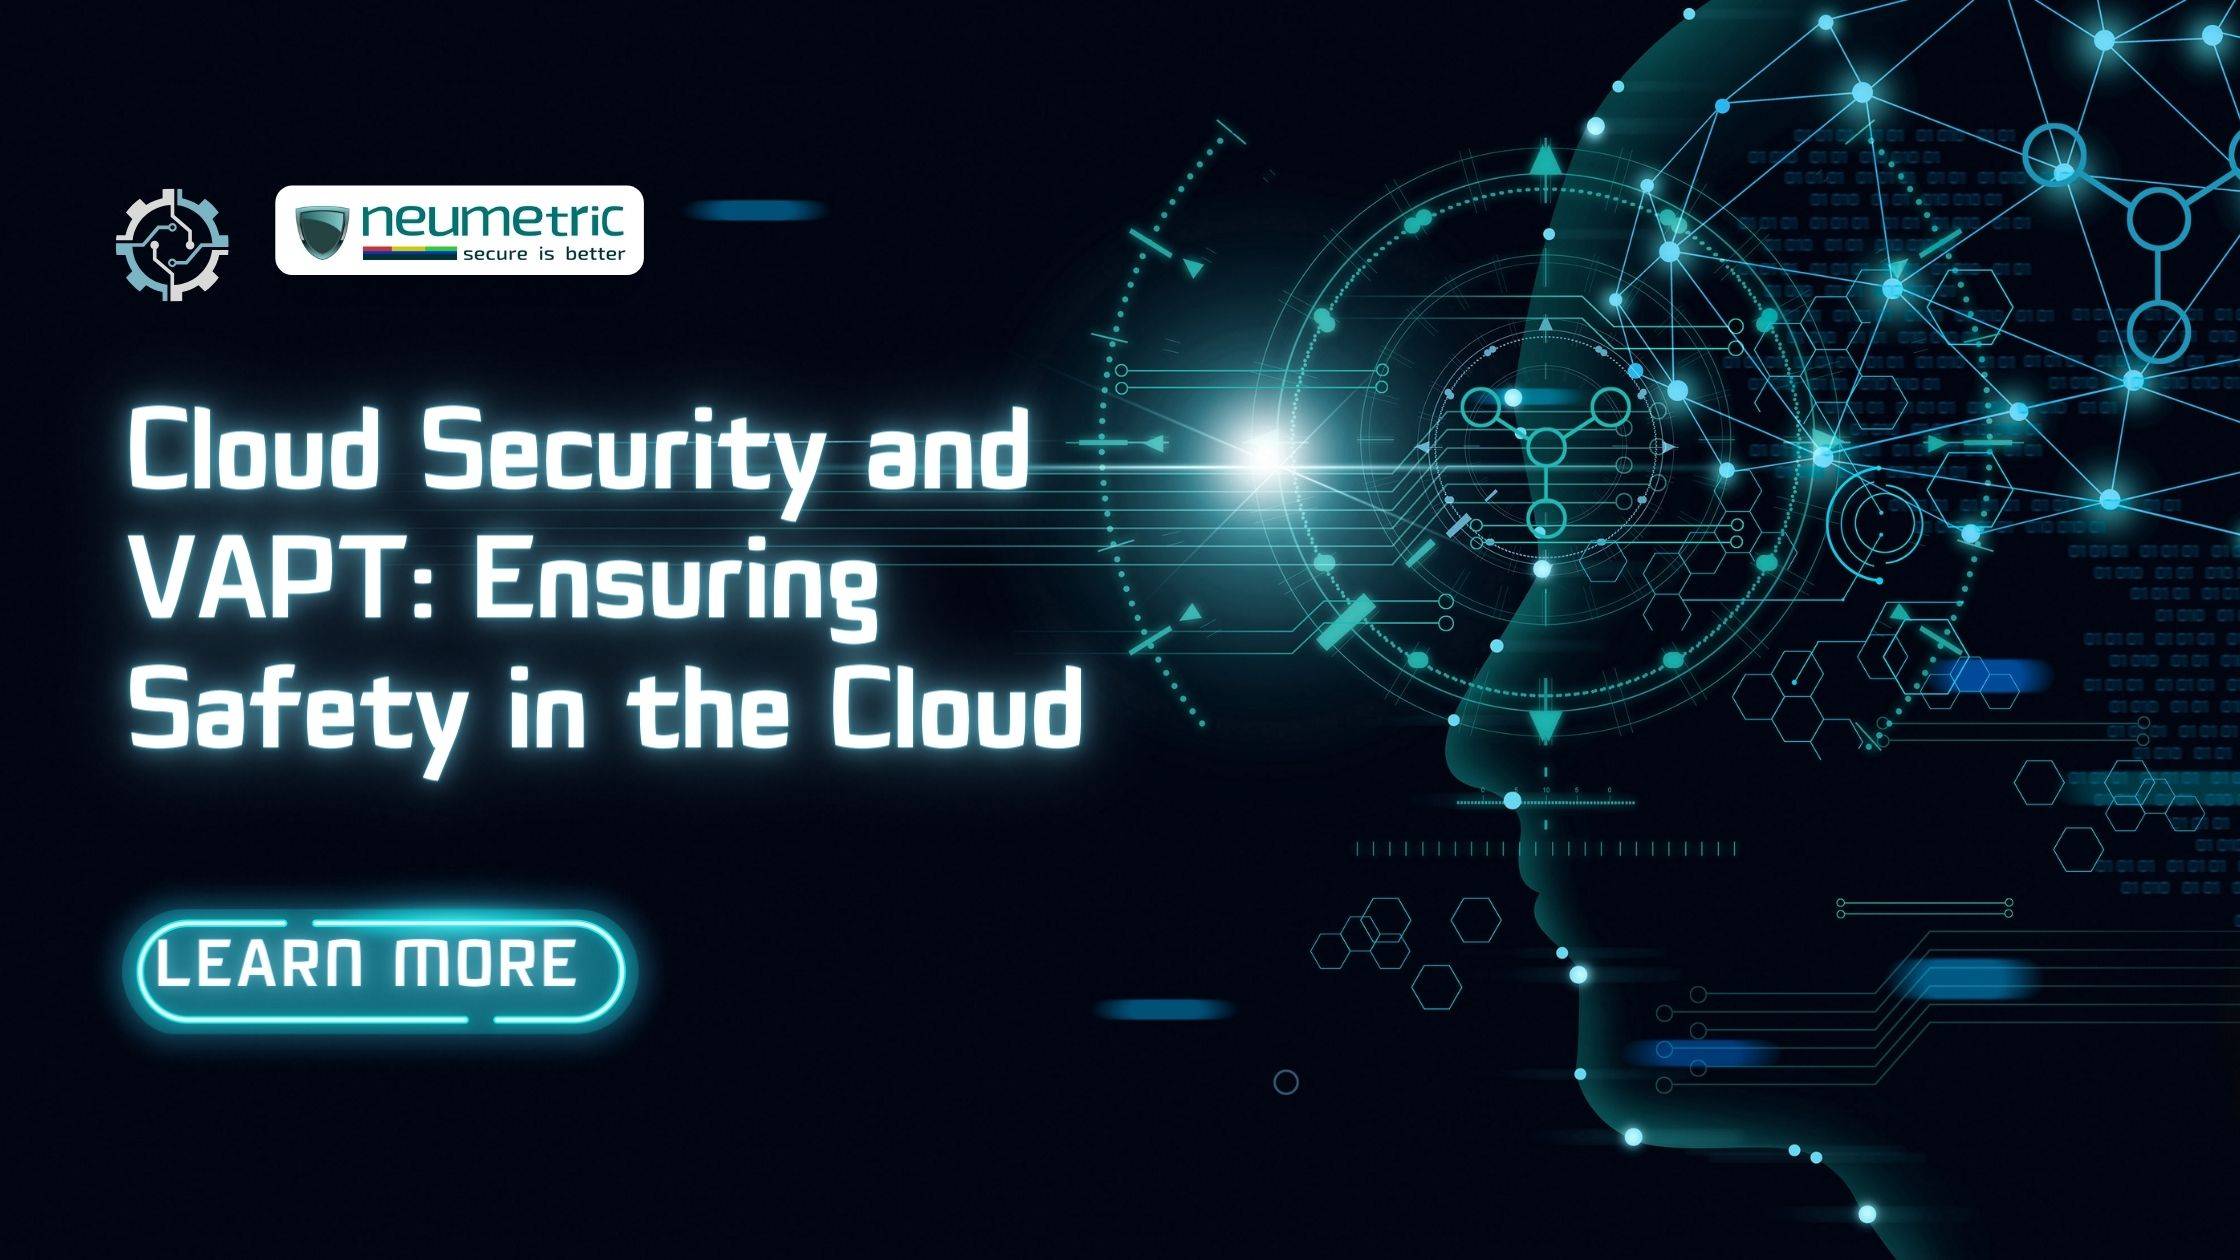 Cloud Security and VAPT: Ensuring Safety in the Cloud